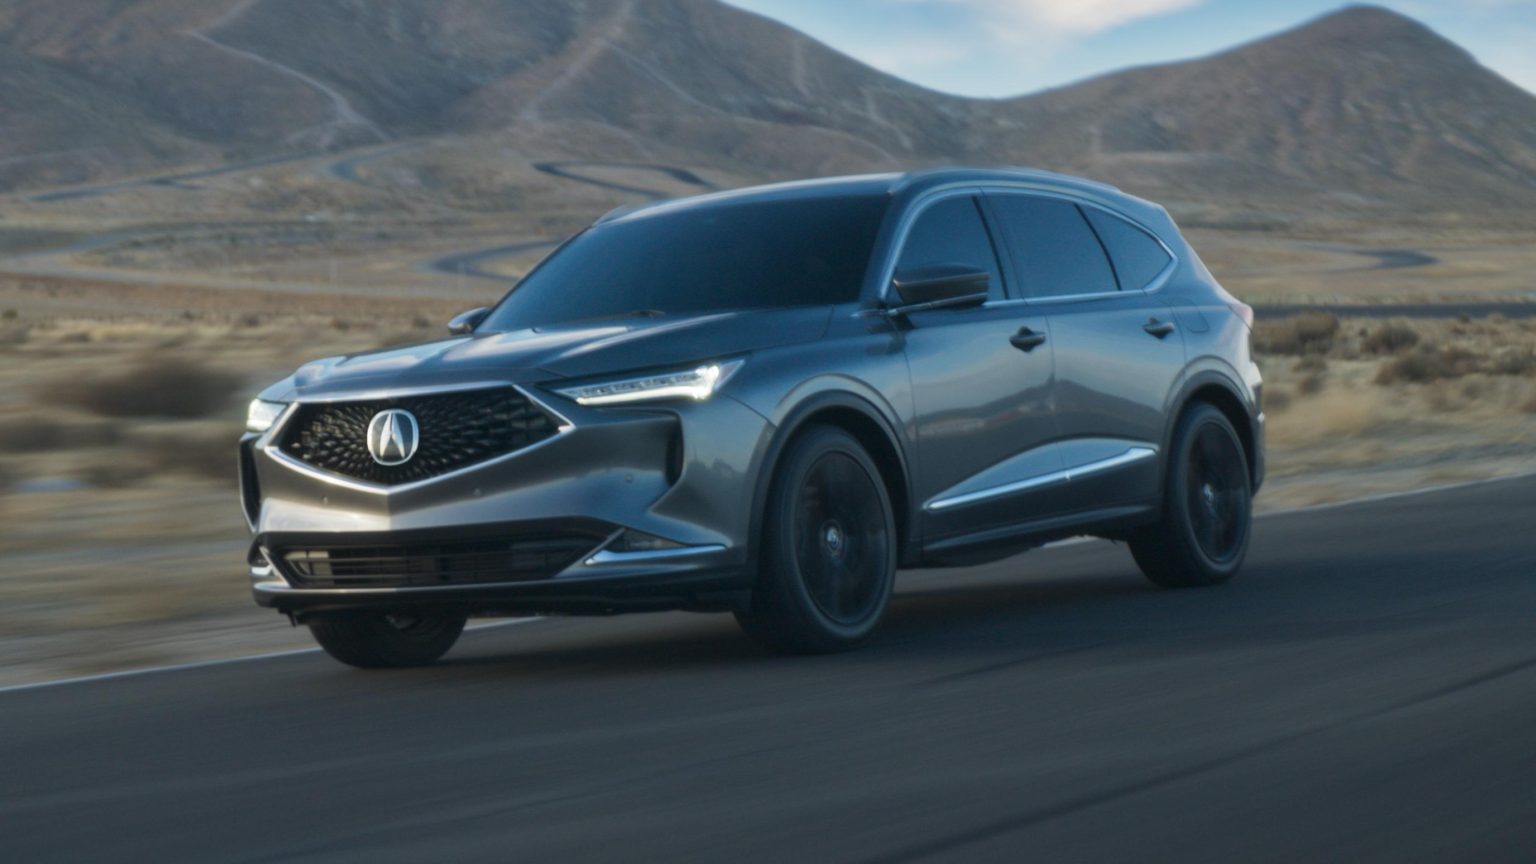 The MDX is all-new for 2022.